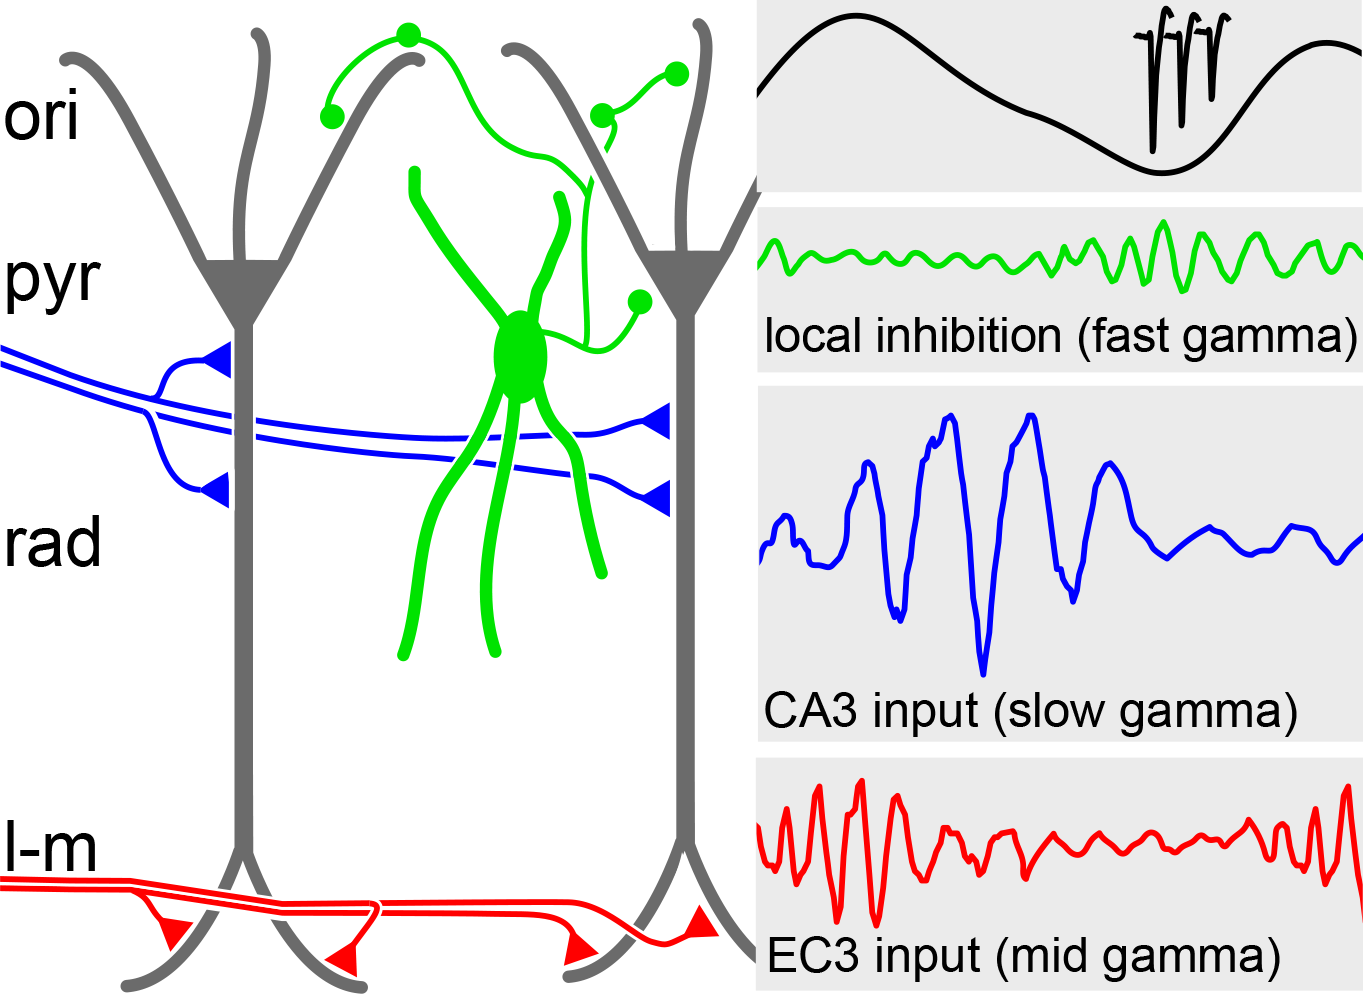 Schematic showing the different types of gamma-frequency oscilations found in CA1 hippocampus along with their cellular substrates.